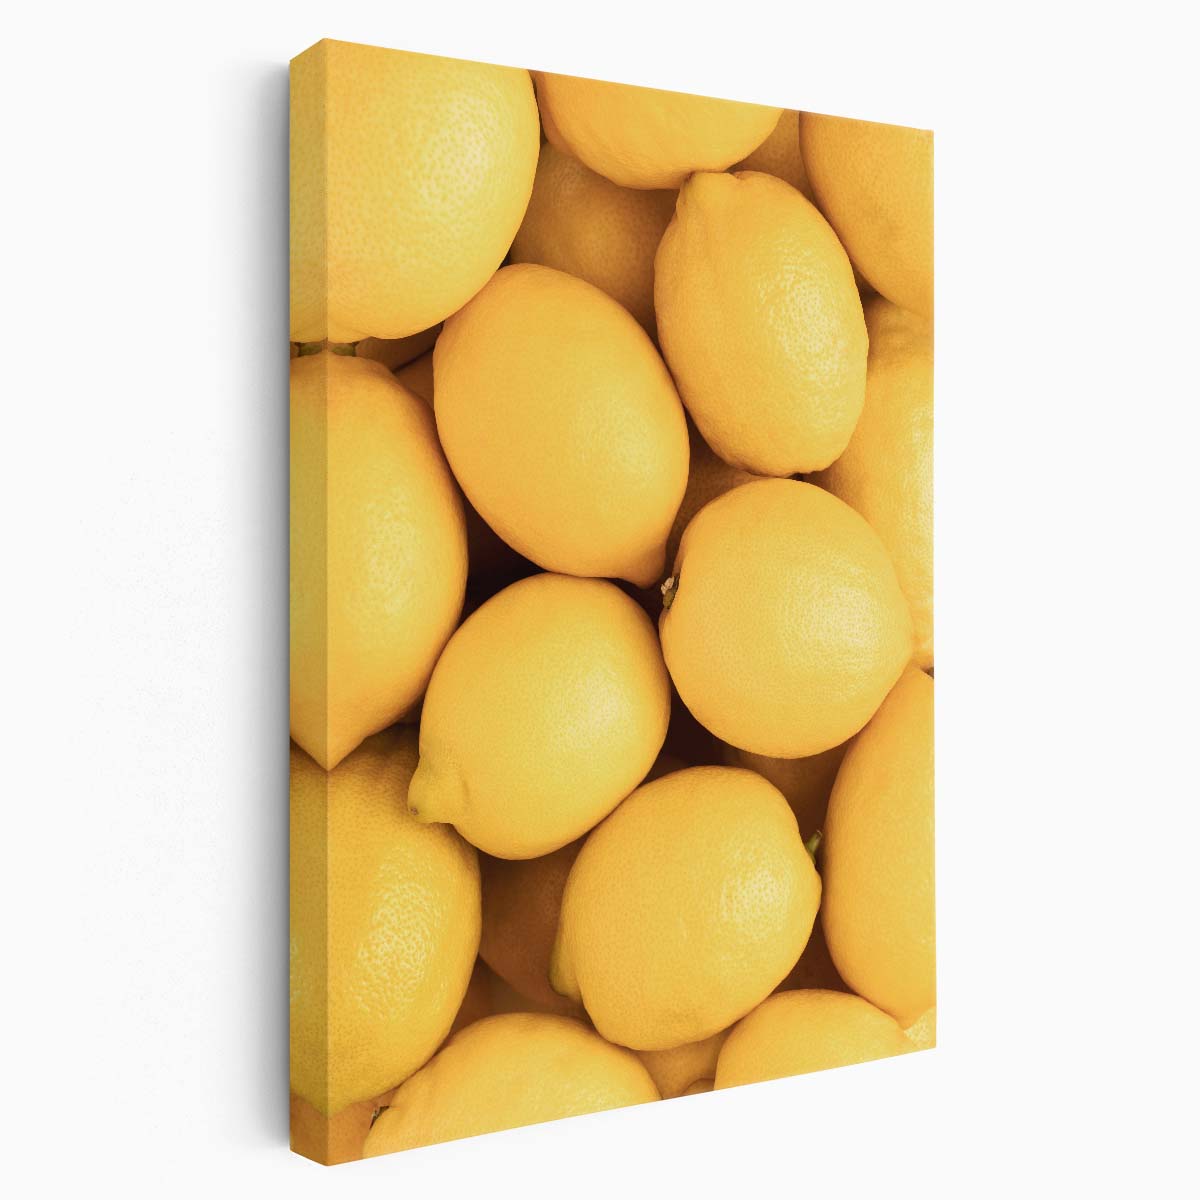 Abstract Lemon Pattern Photography - Yellow Citrus Still Life Kitchen Art by Luxuriance Designs, made in USA